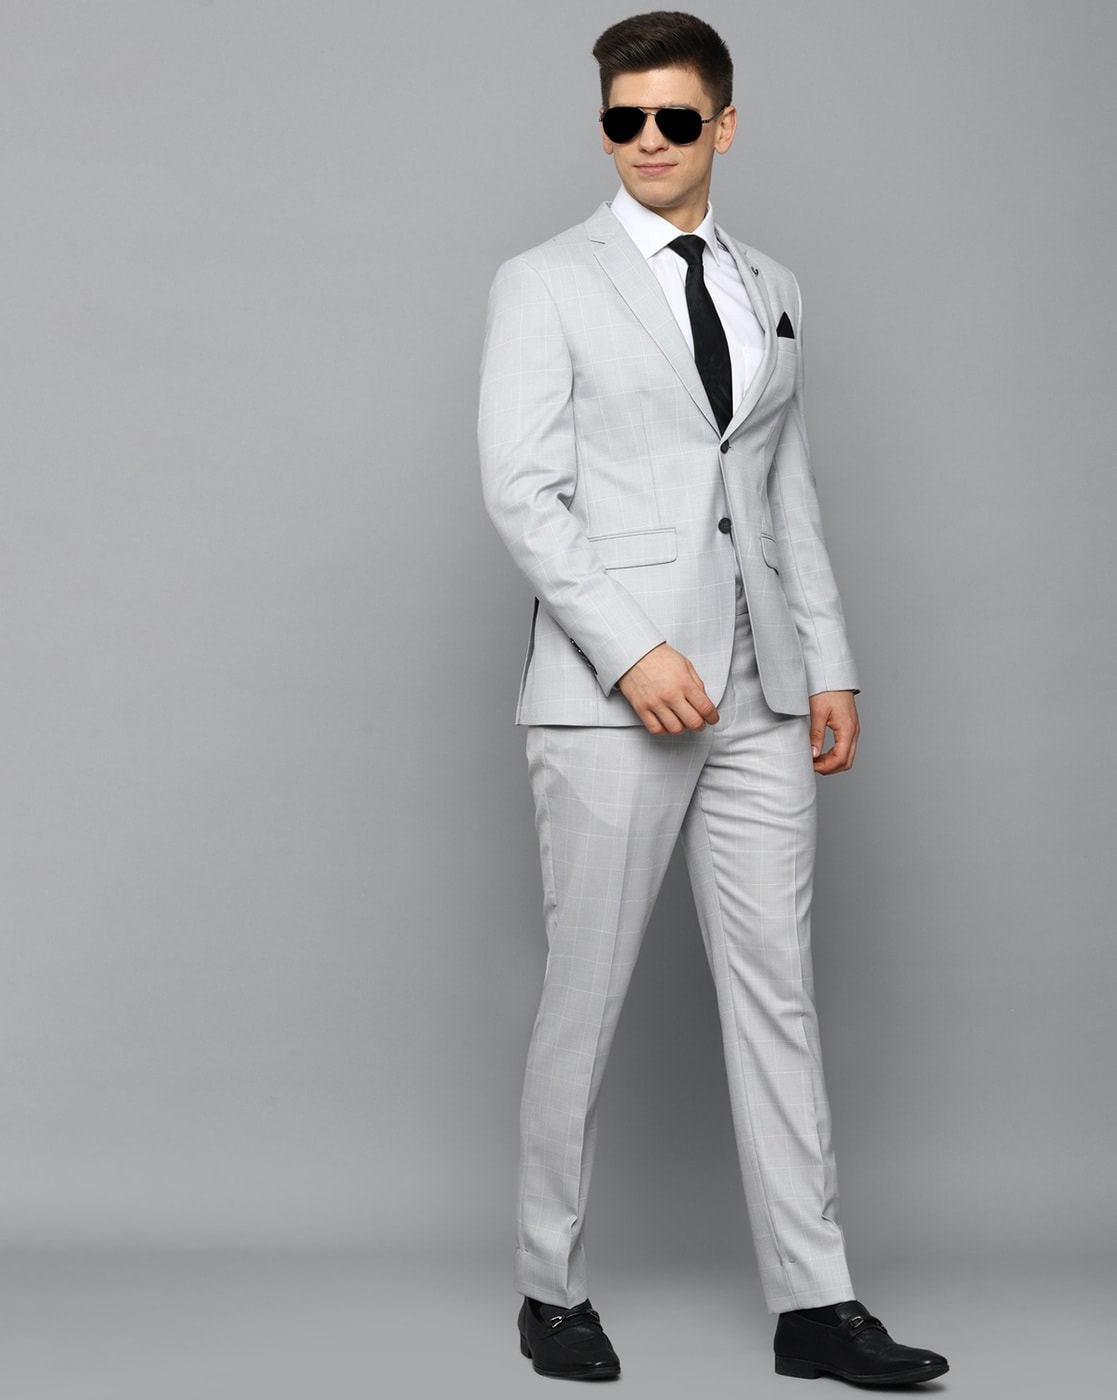 12 Ways to Get a Stylish Suit on the Cheap